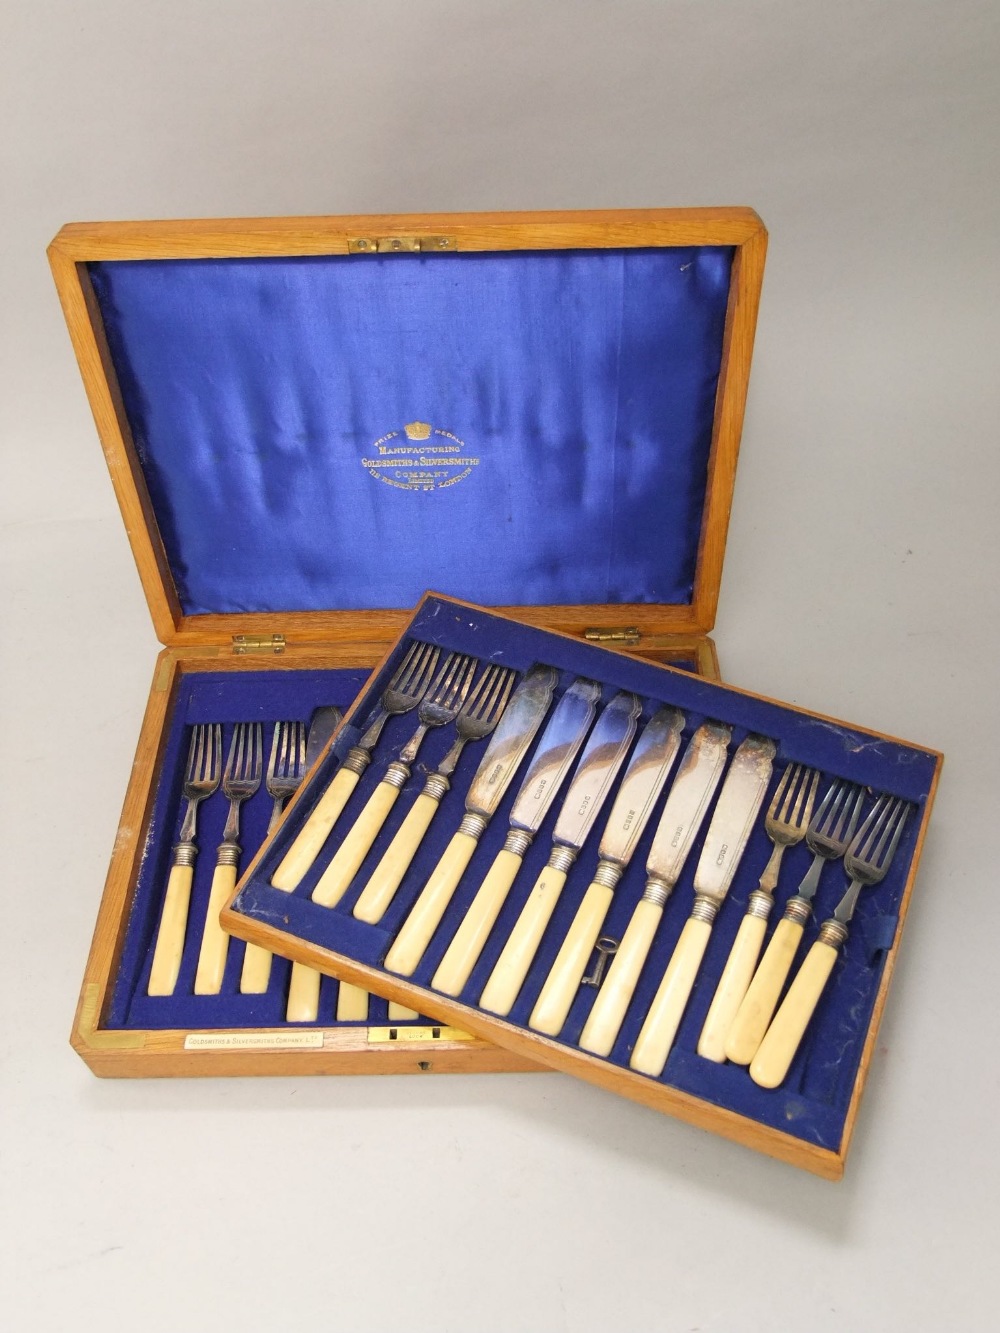 Goldsmiths & Silversmiths Co Ltd two tiered canteen of bone handled fish cutlery